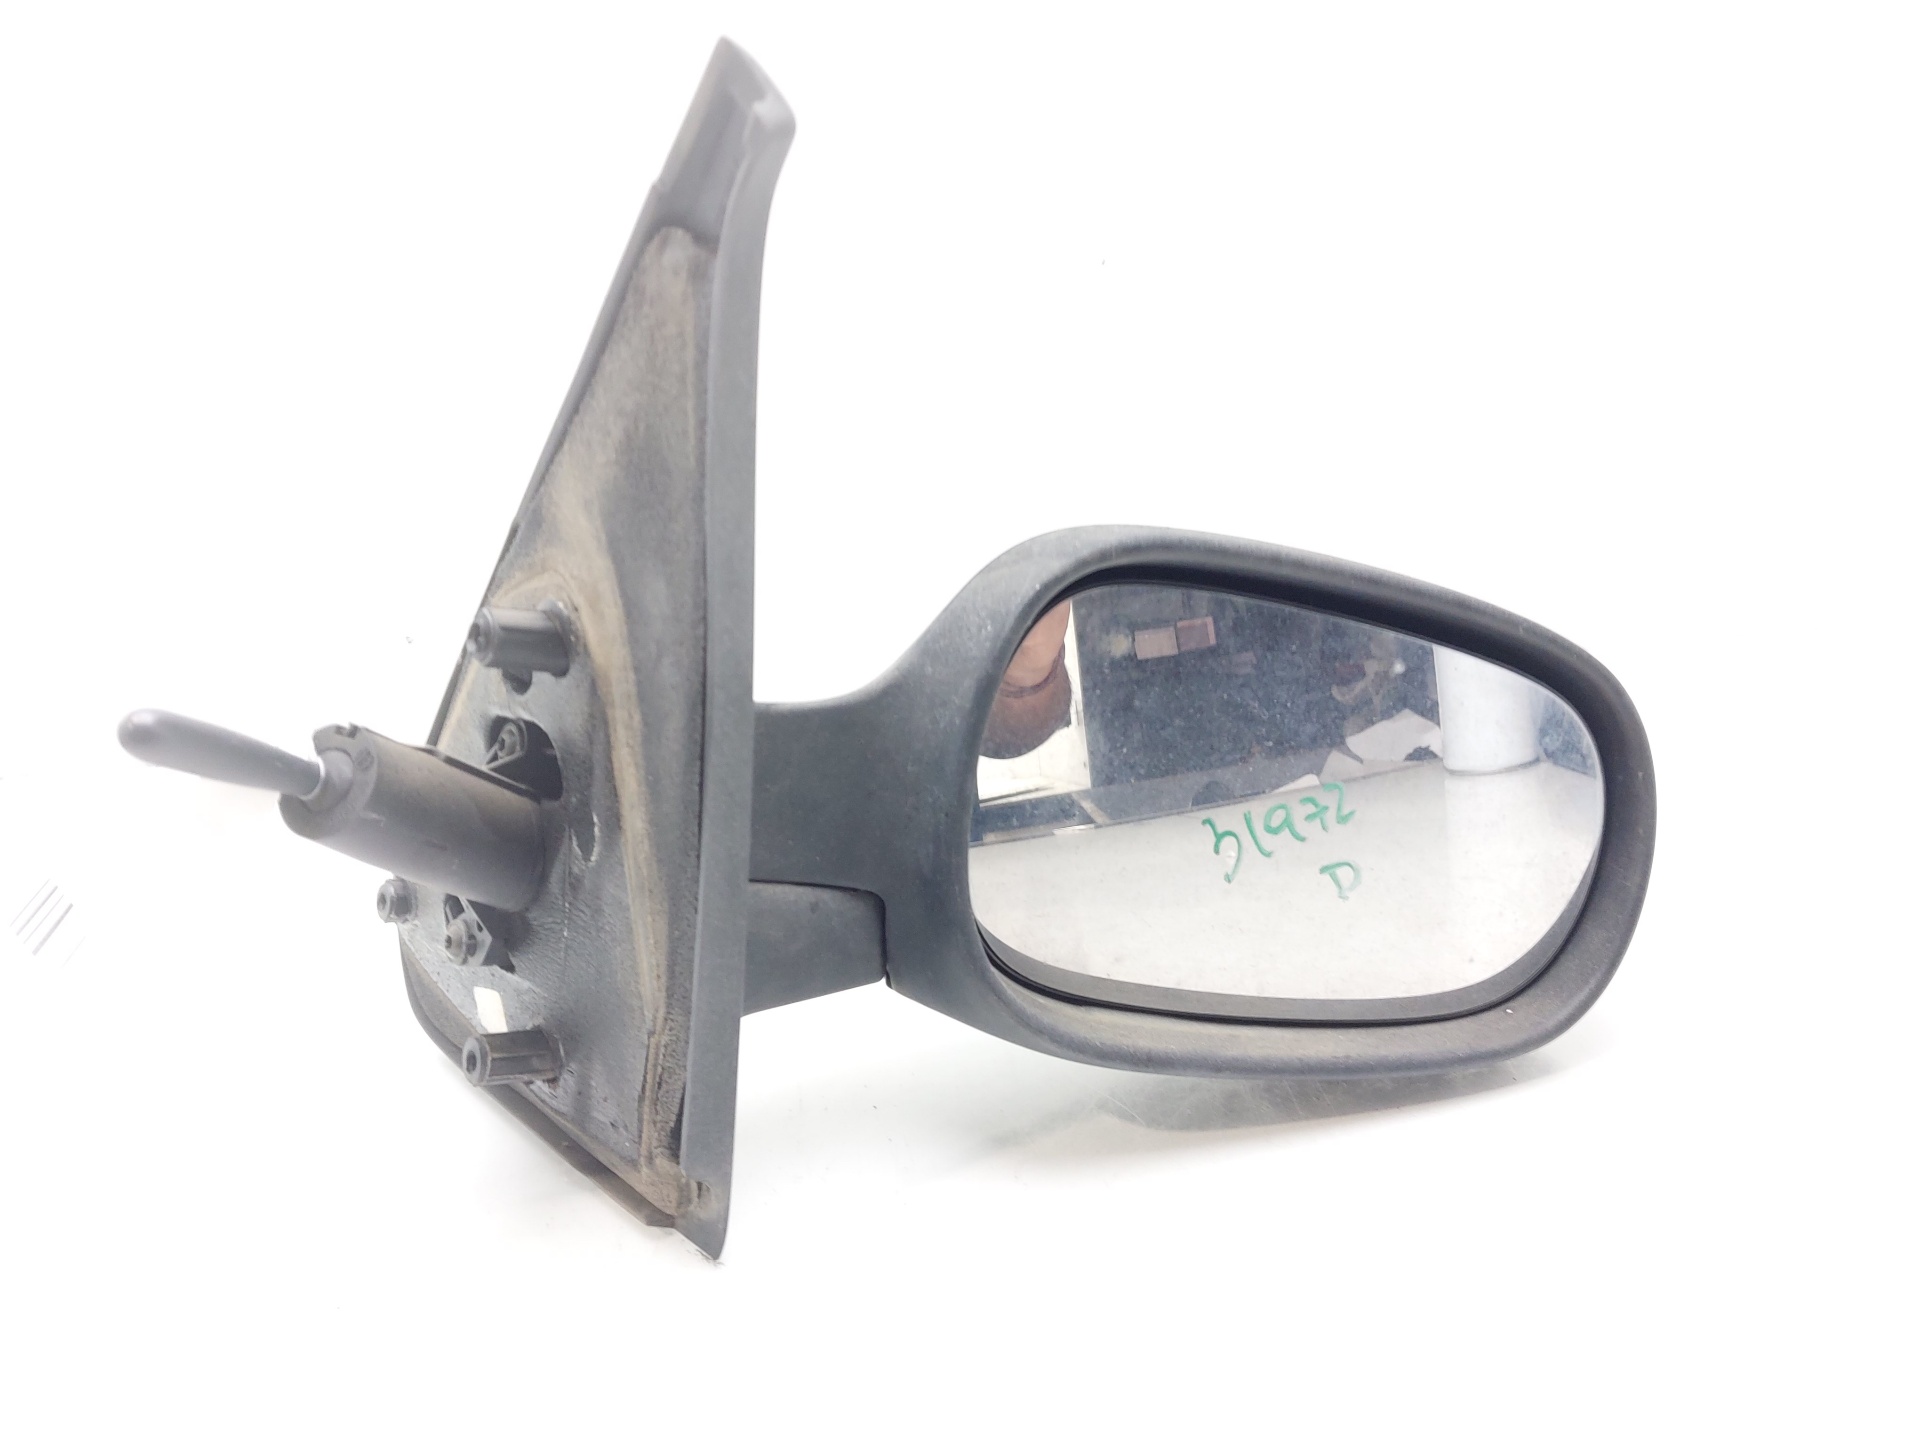 VAUXHALL Right Side Wing Mirror 8200163302 25412244